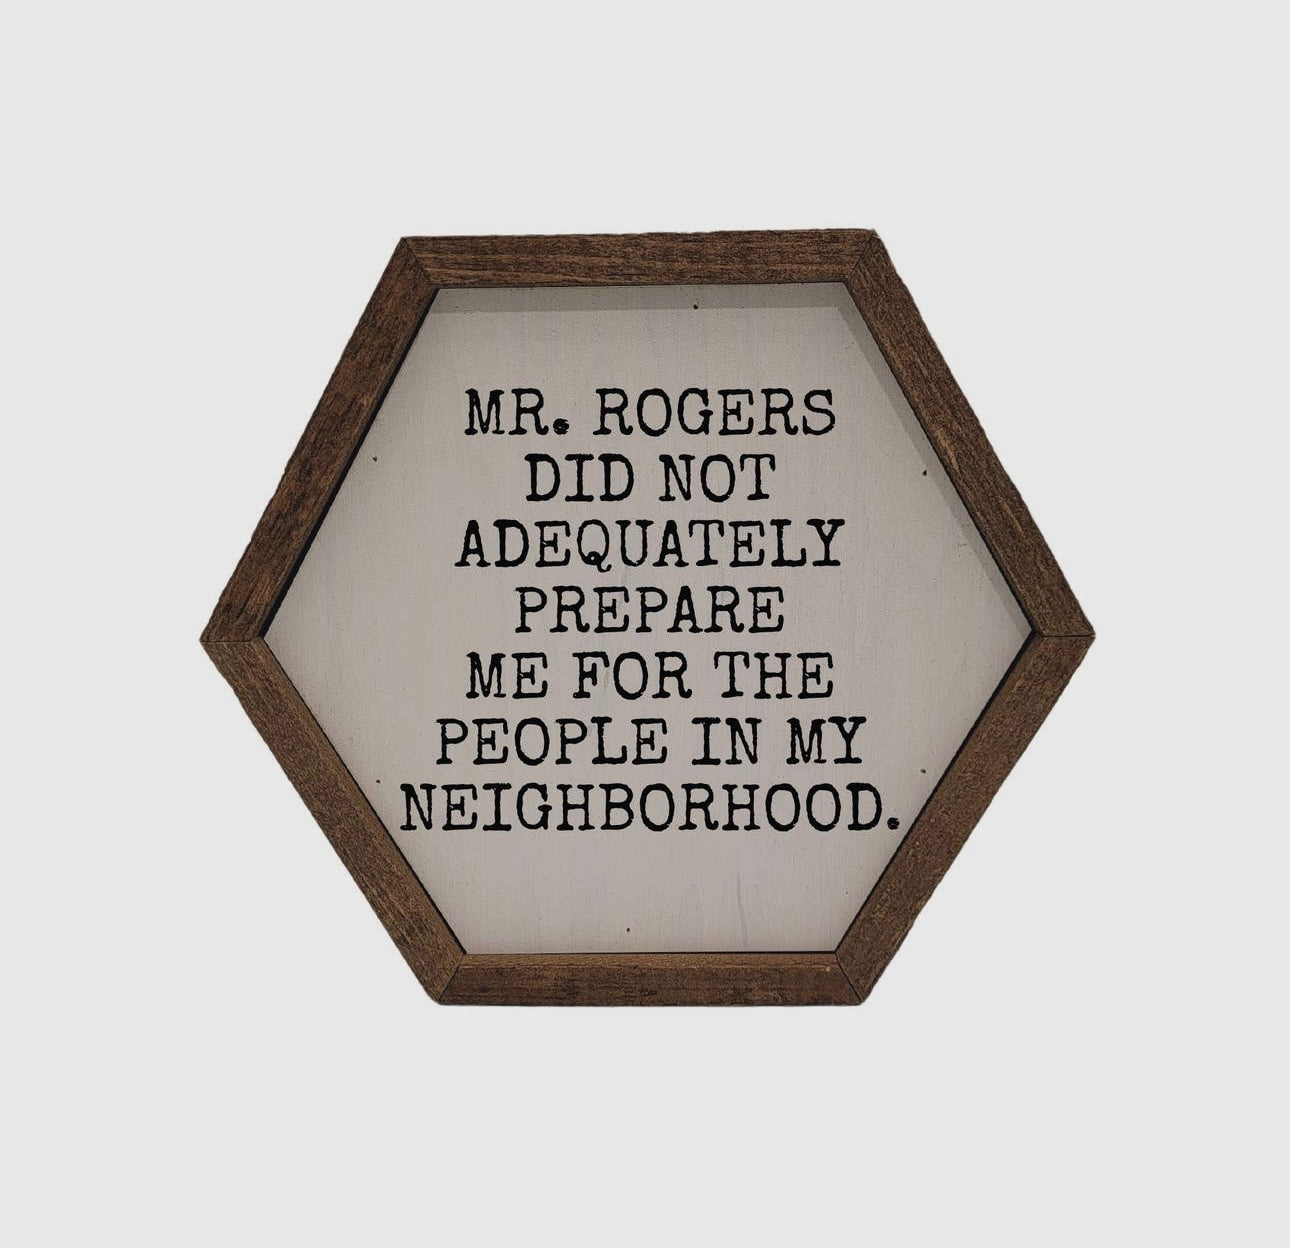 Mr. Rogers sign